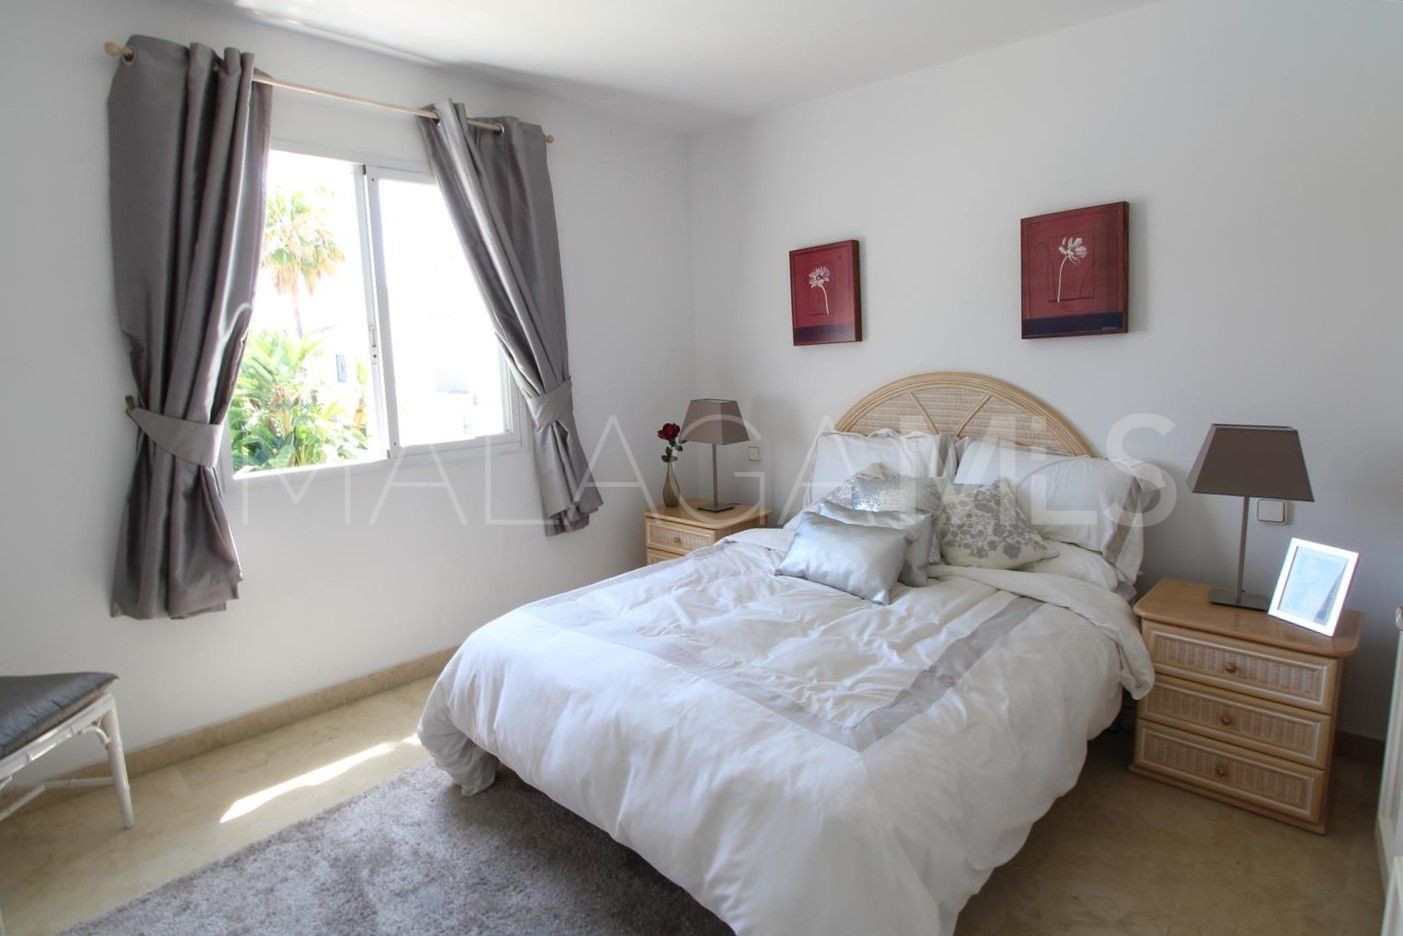 4 bedrooms Nueva Andalucia town house for sale